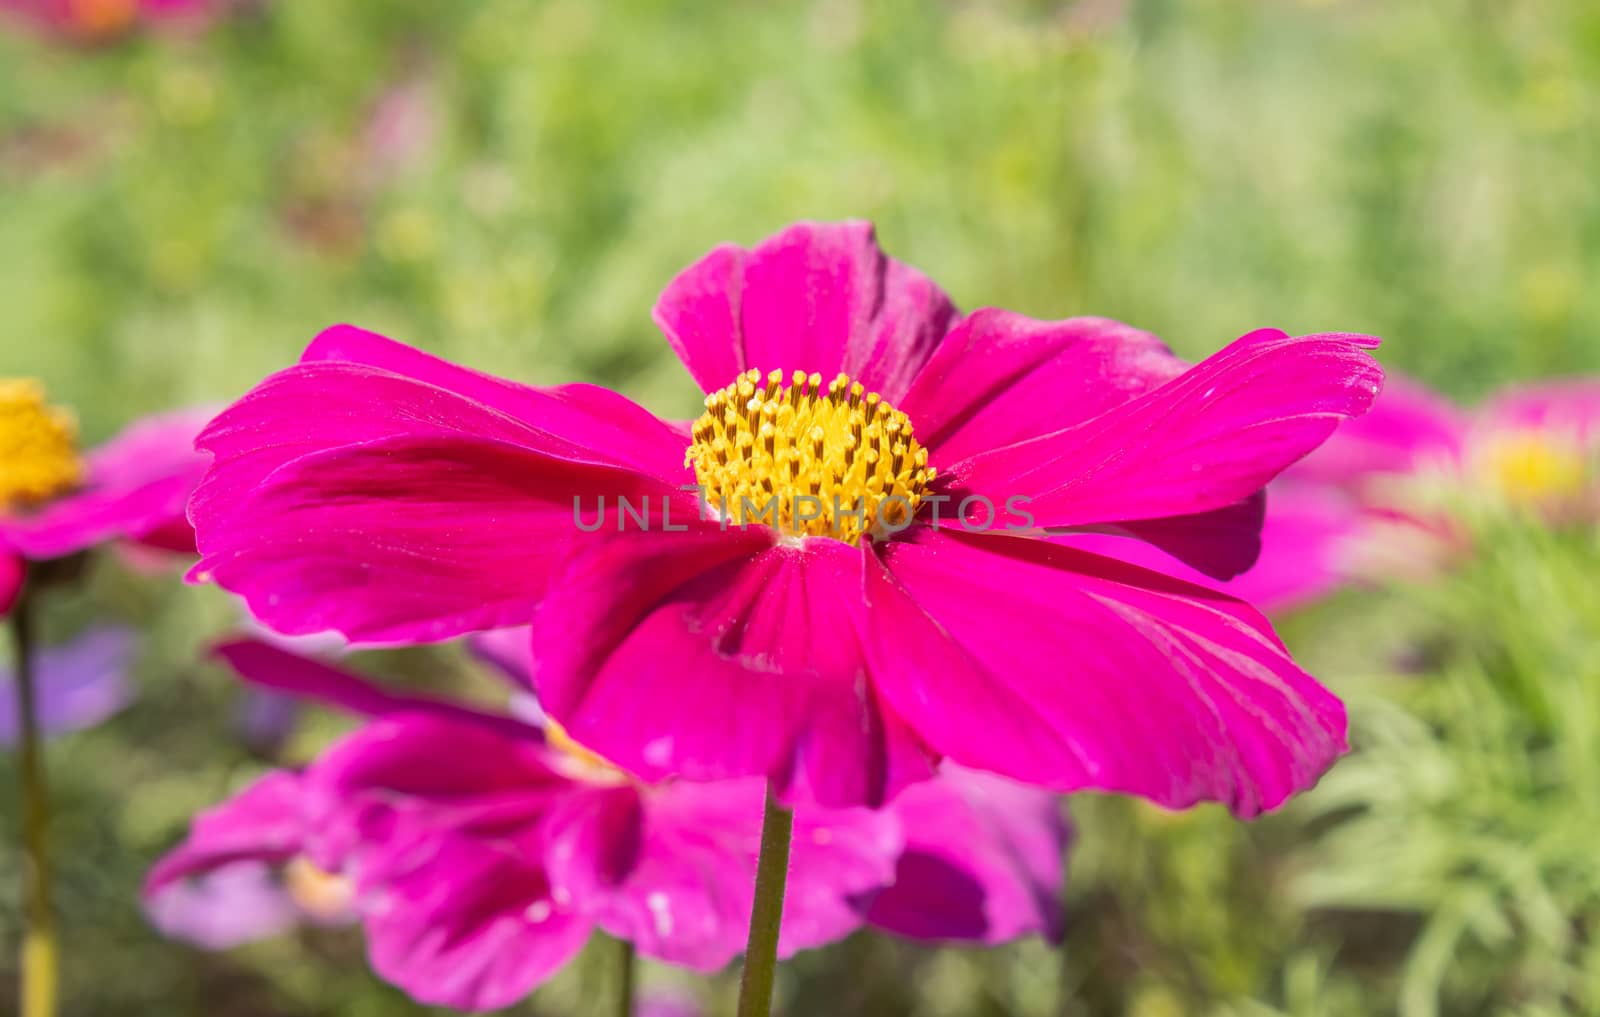 Magenta Cosmos Flower in Garden with Natural Light in Close Up View on Green Leaves Background